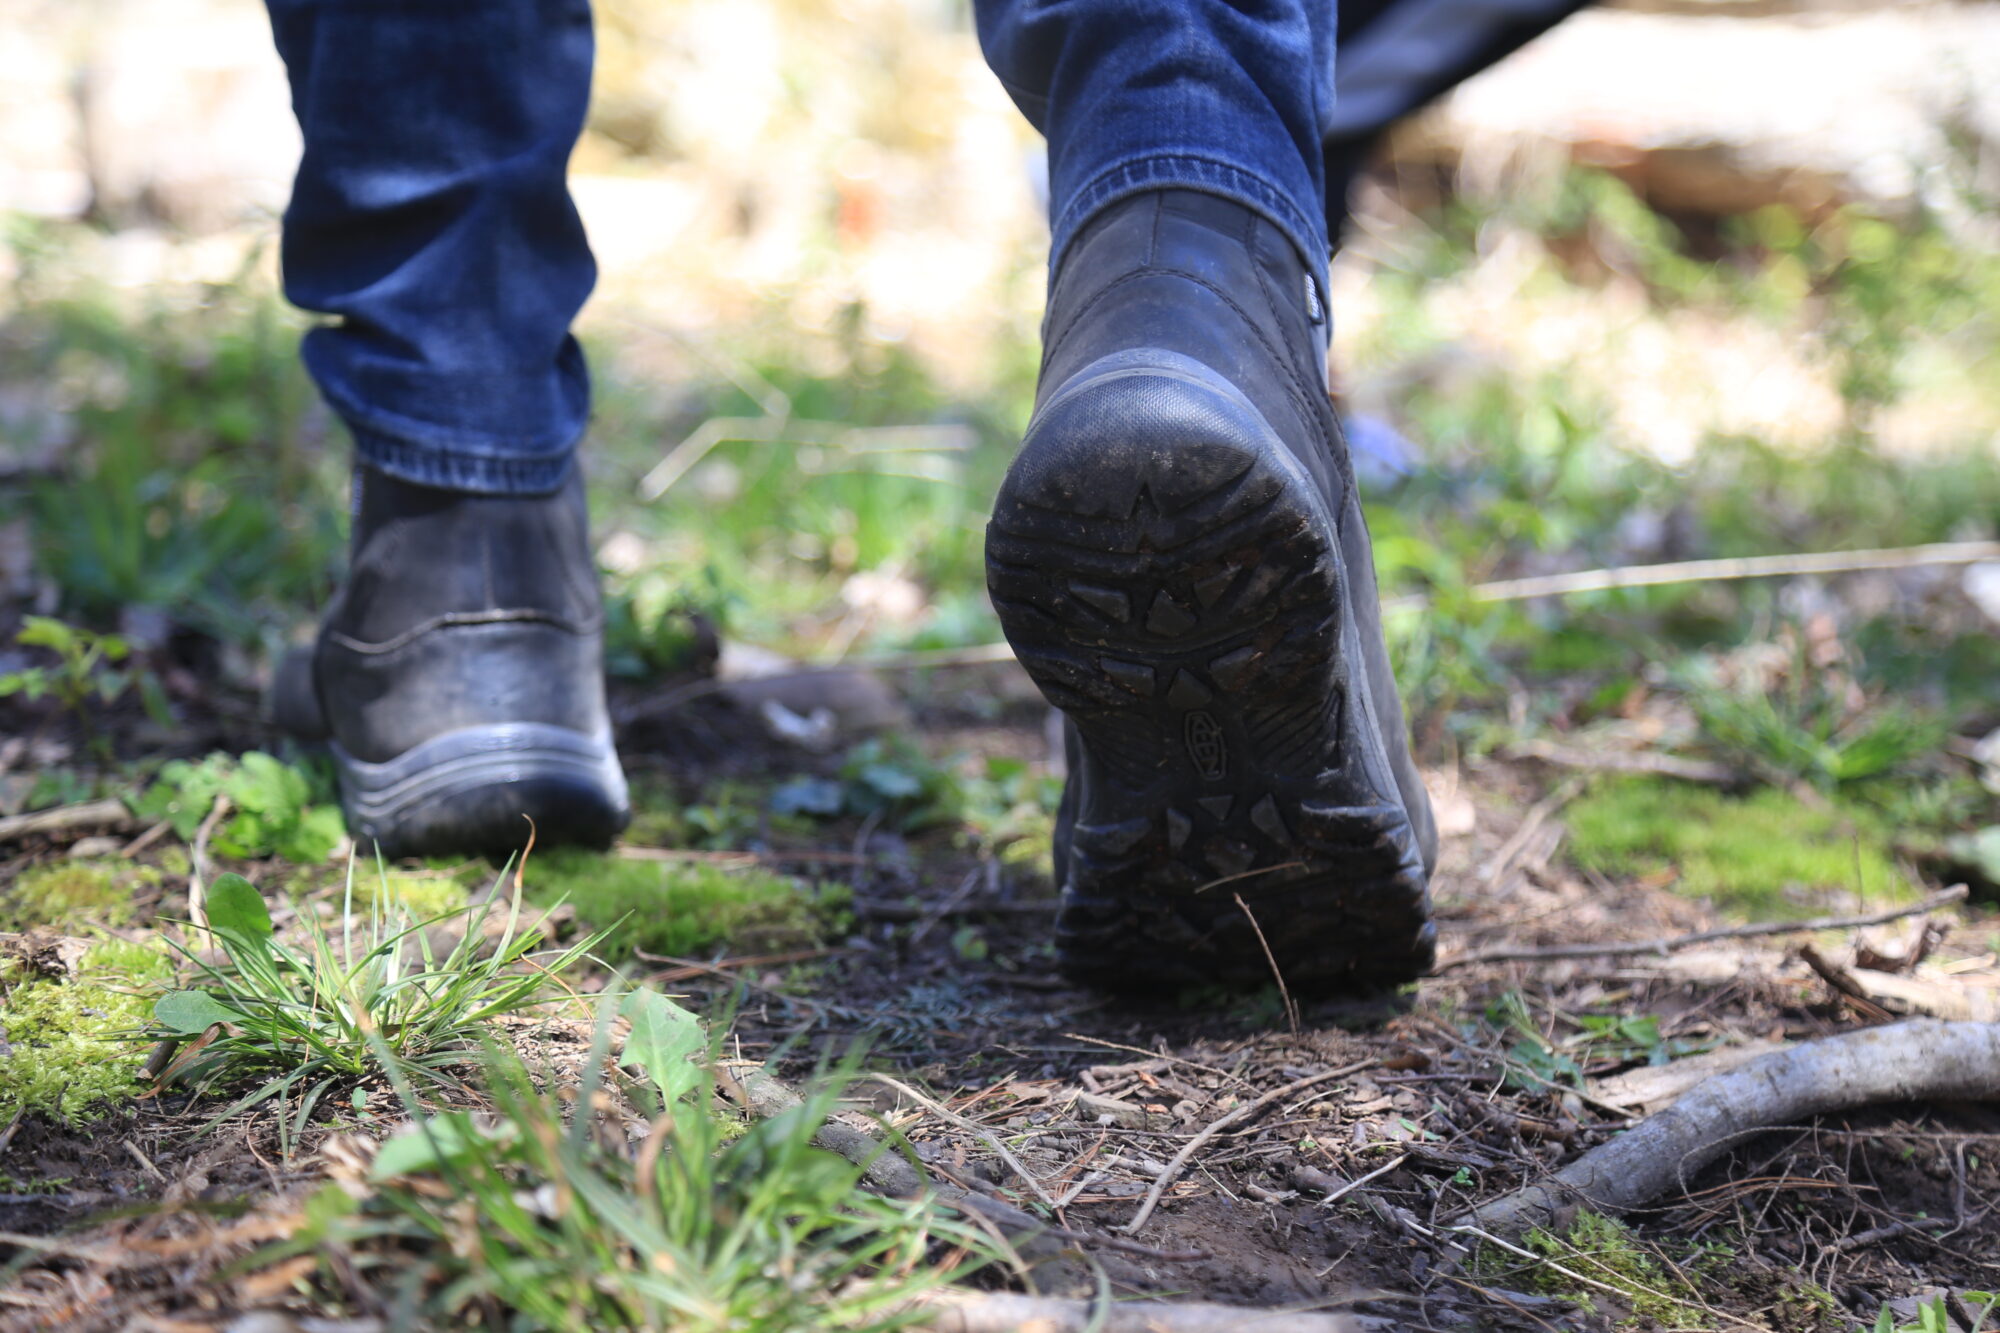 a close up of an individual's boots while they walk away from the camera